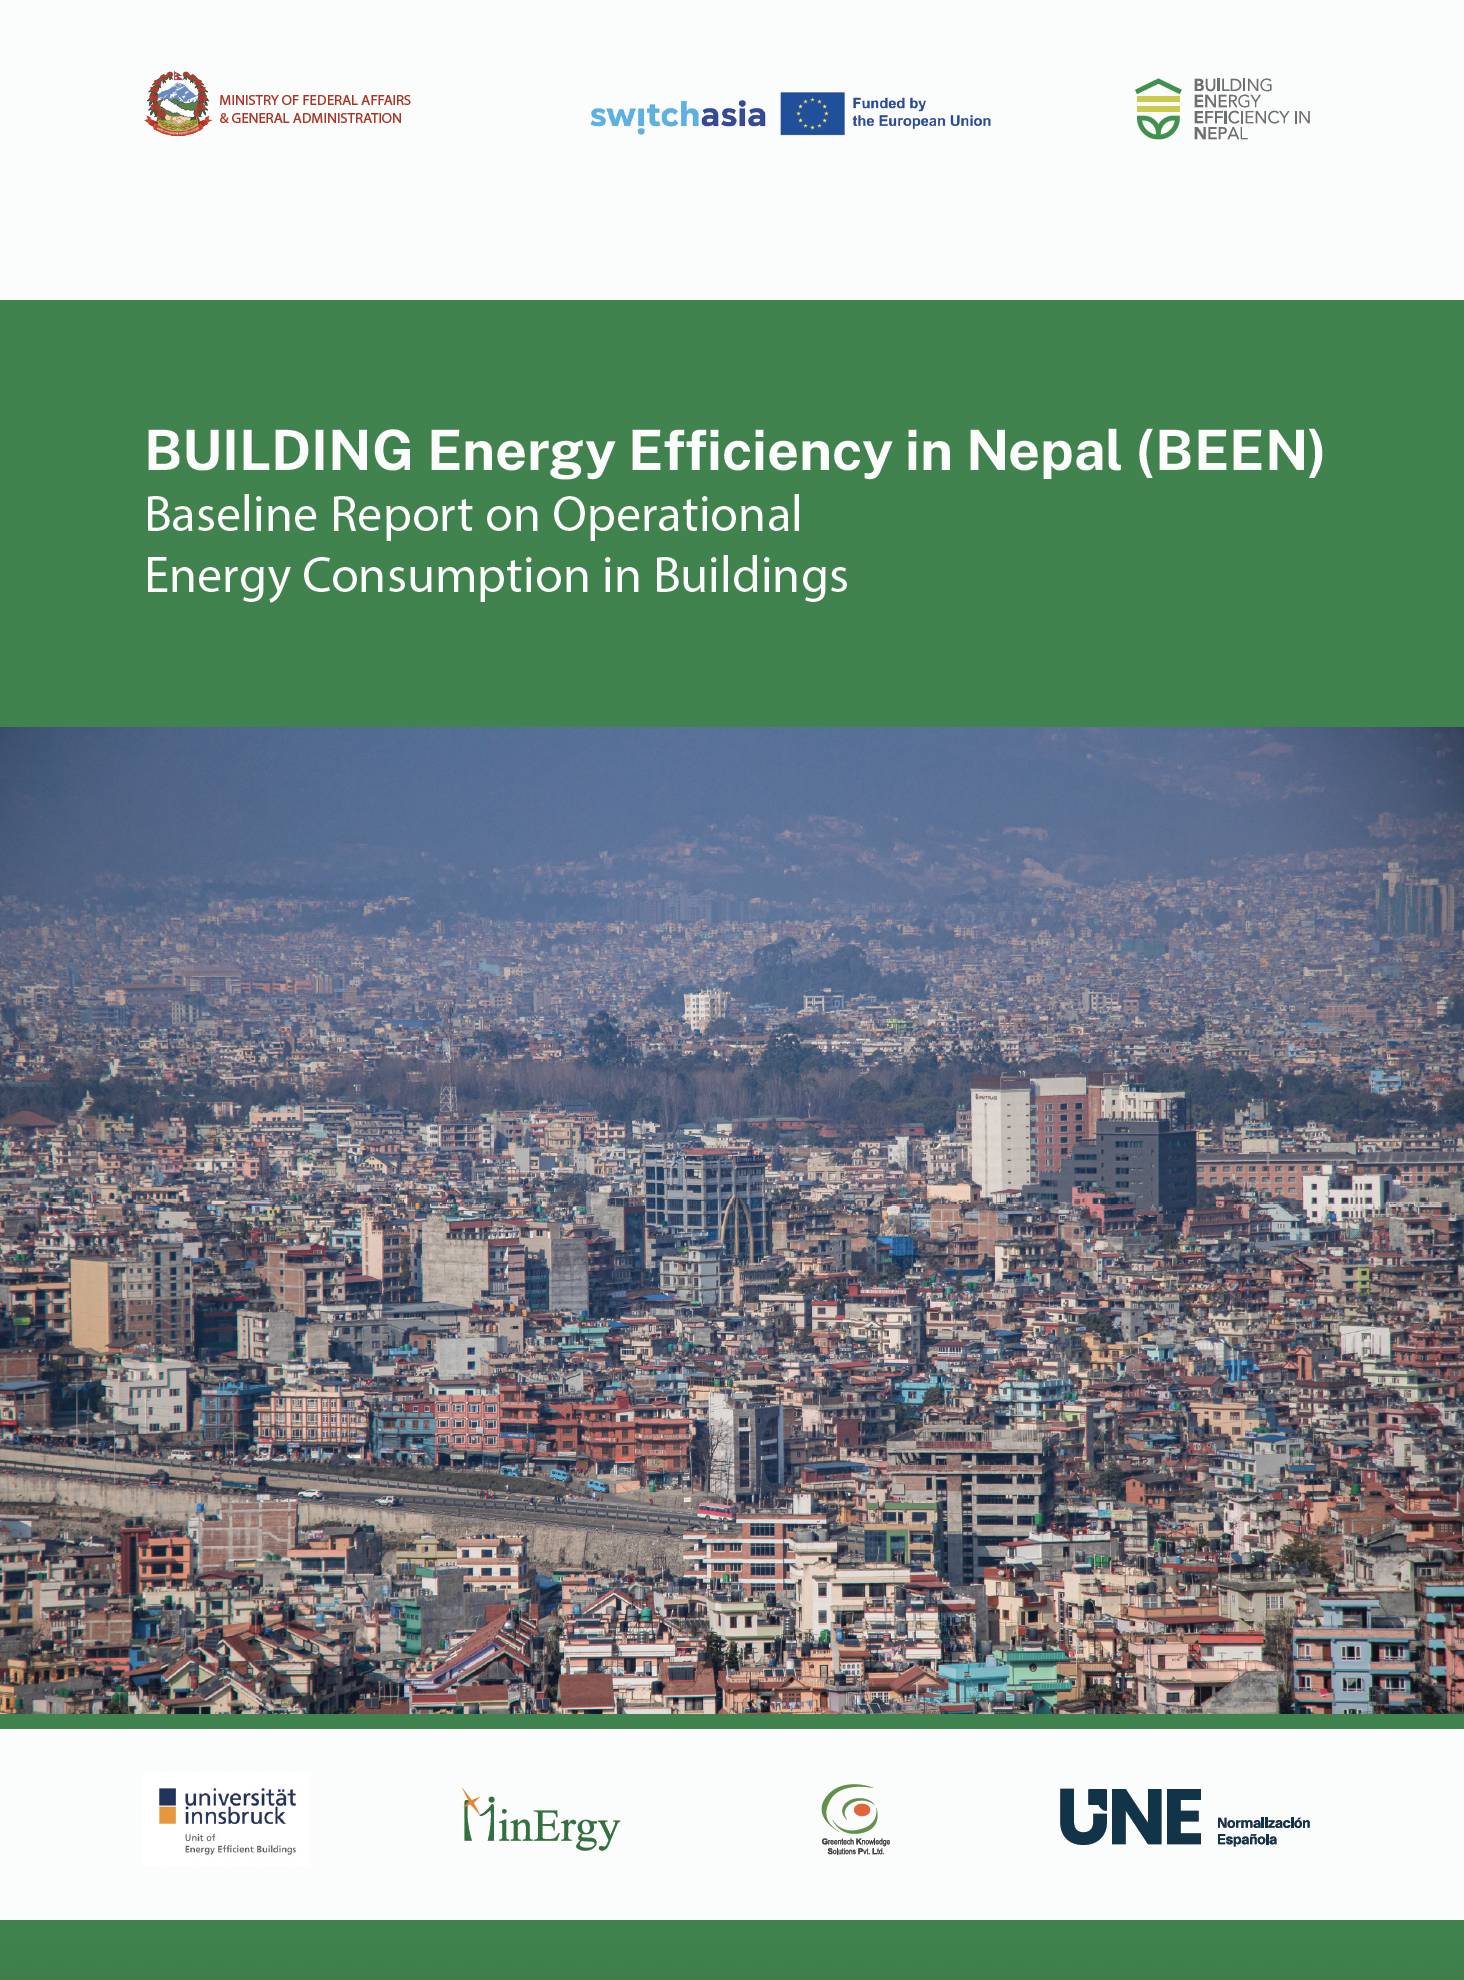 Baseline Report on Operational Energy Consumption in Buildings